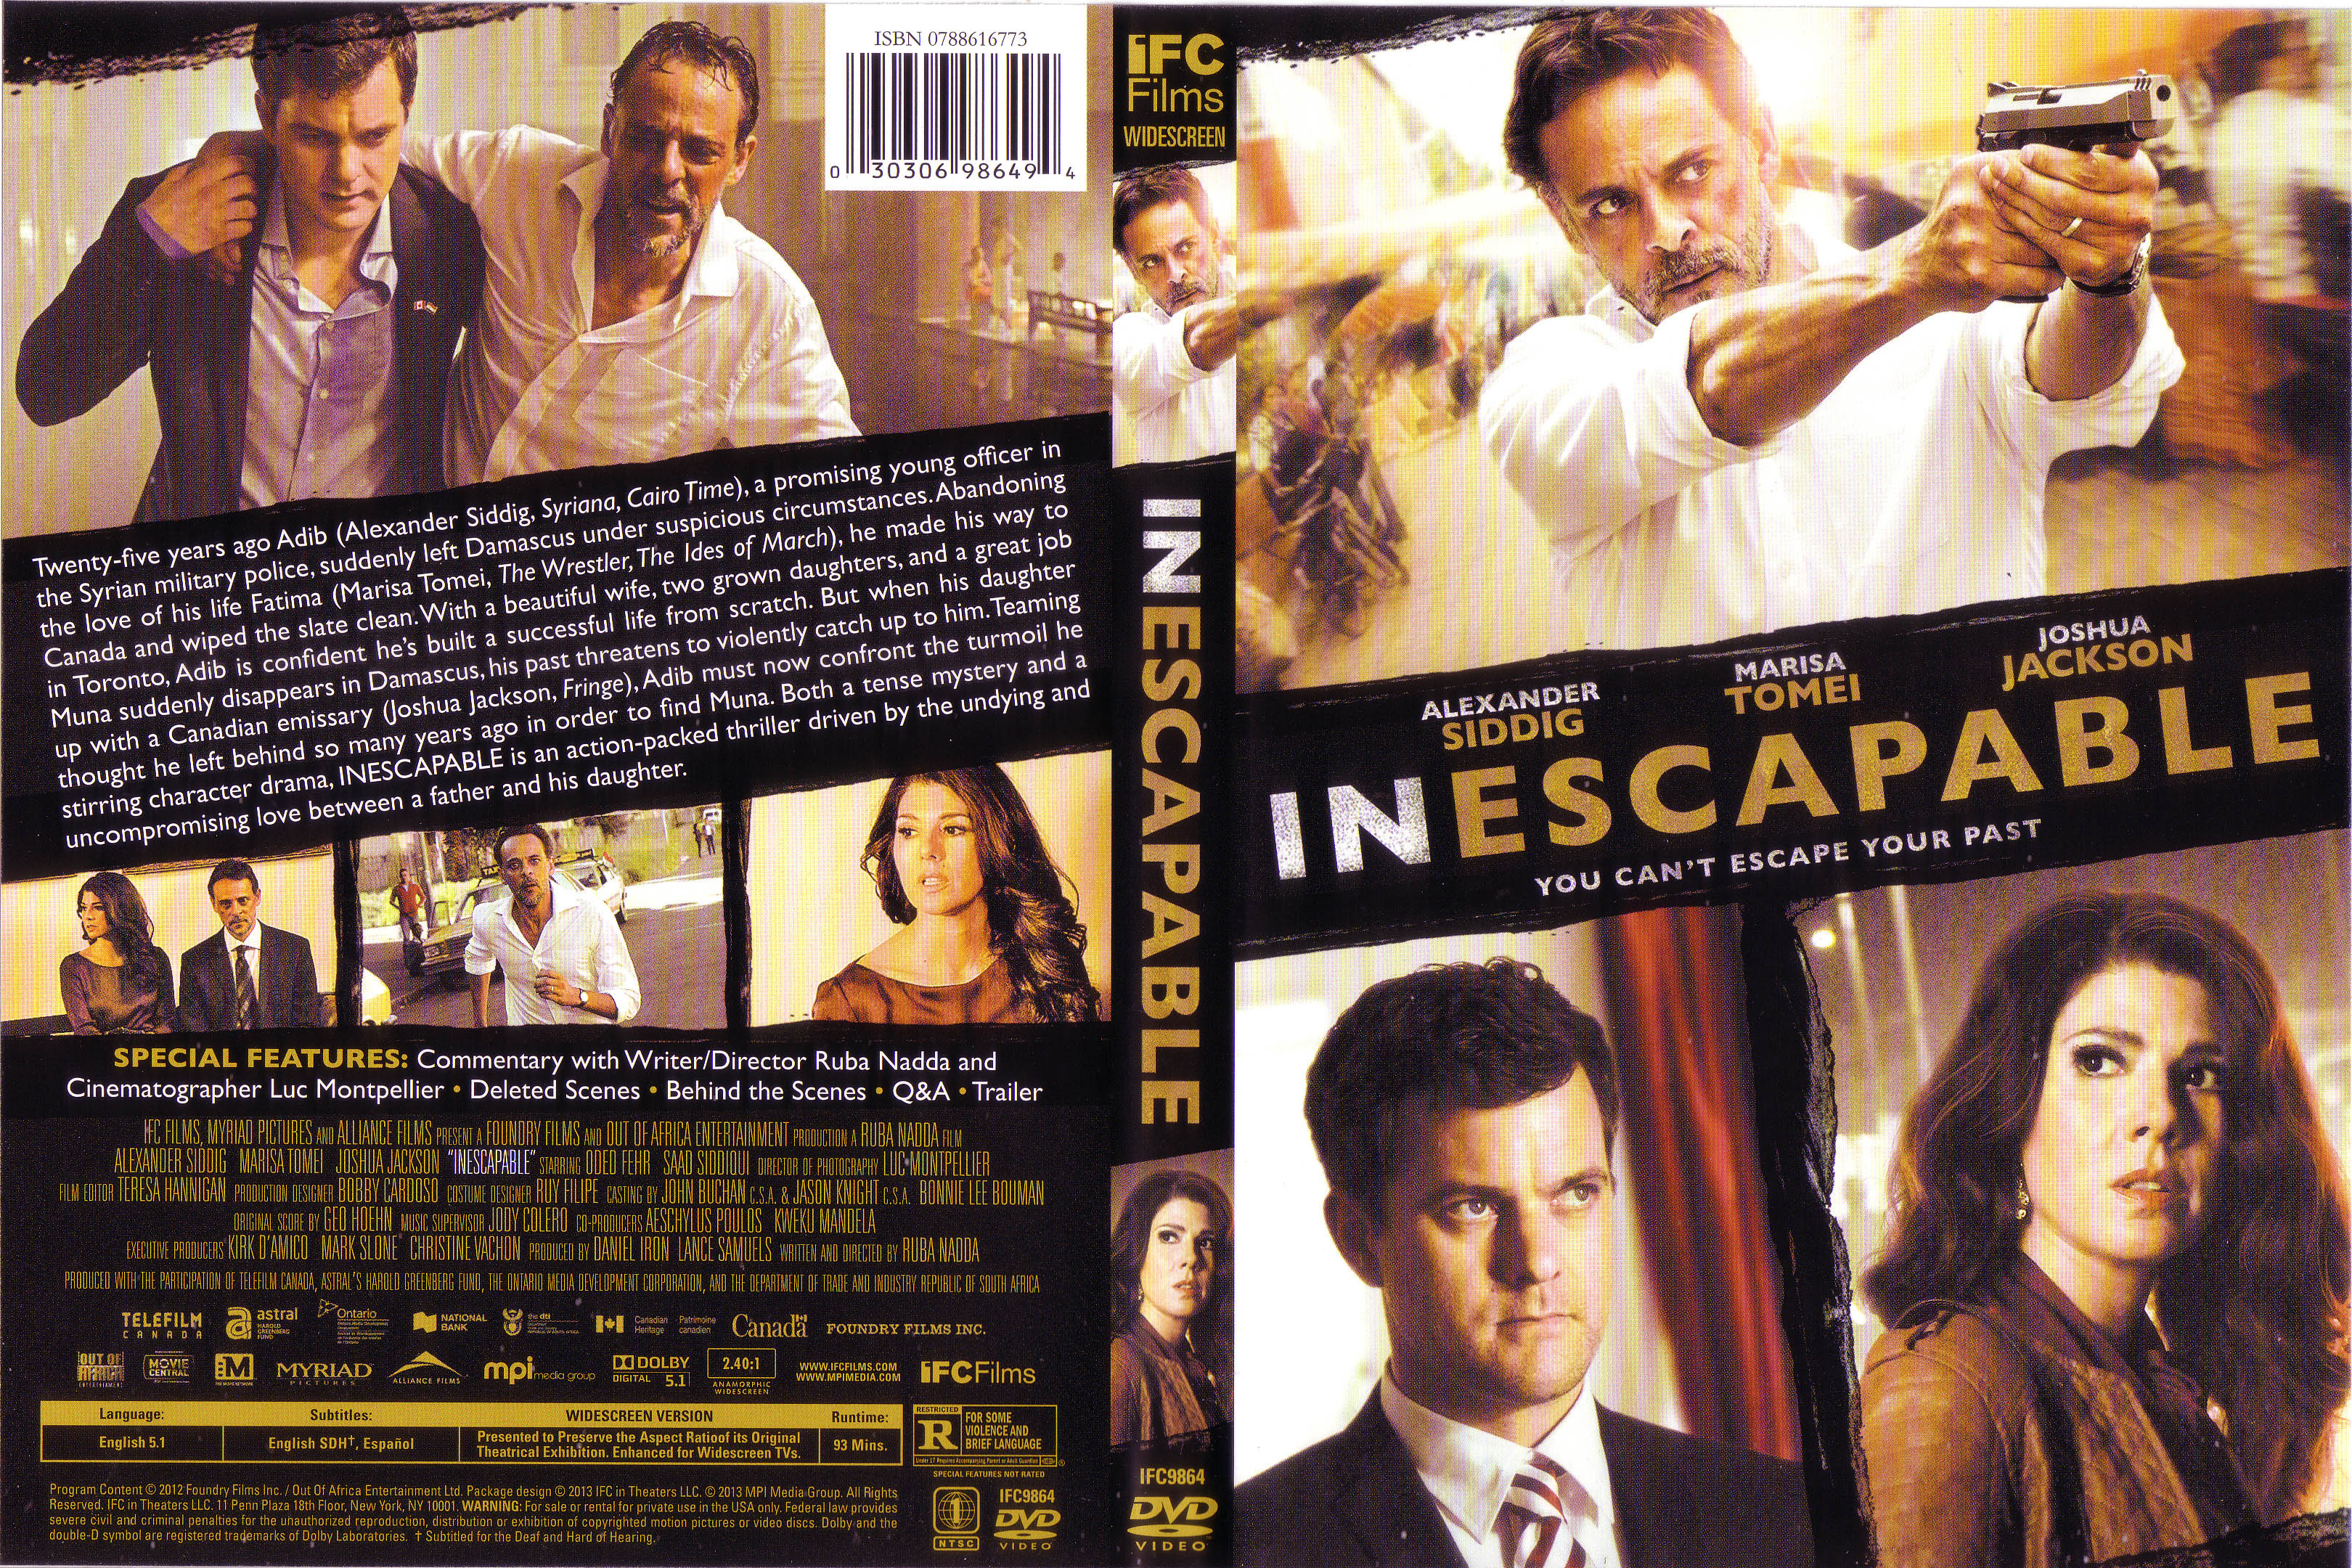 Jaquette DVD Inescapable Zone 1